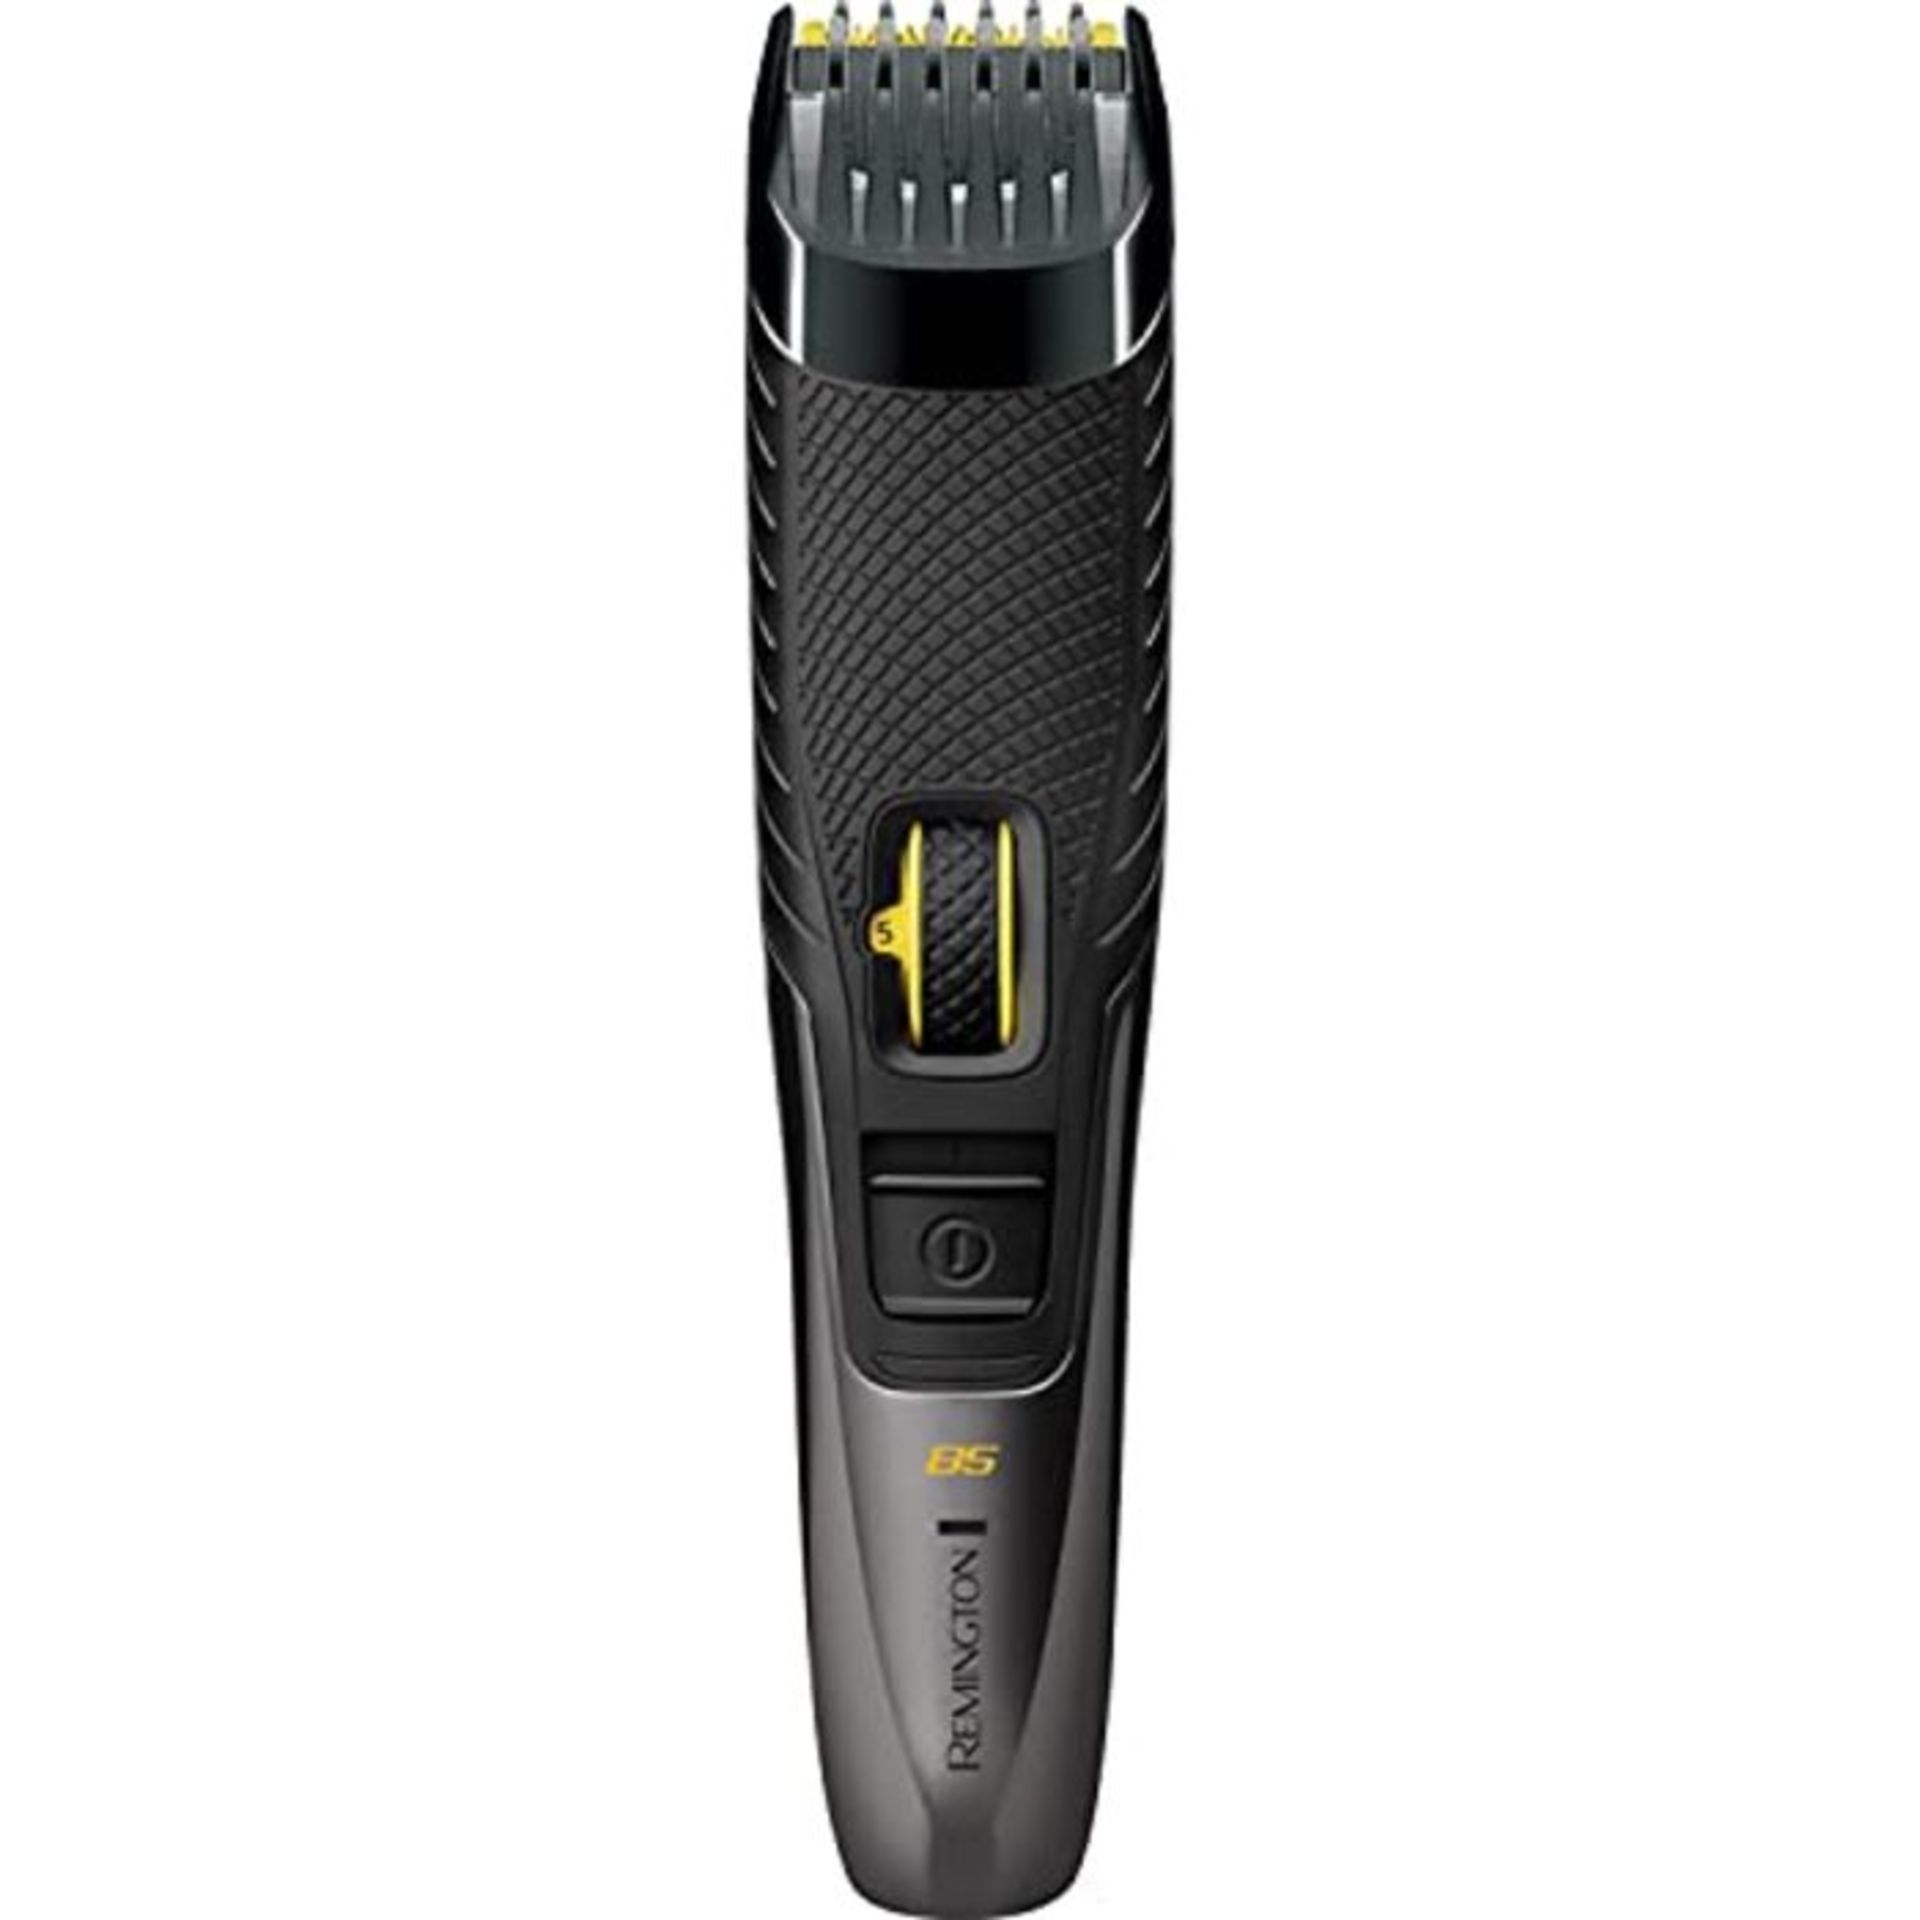 Remington B5 Style Series Cordless Beard and Stubble Trimmer for Men with Adjustable Z